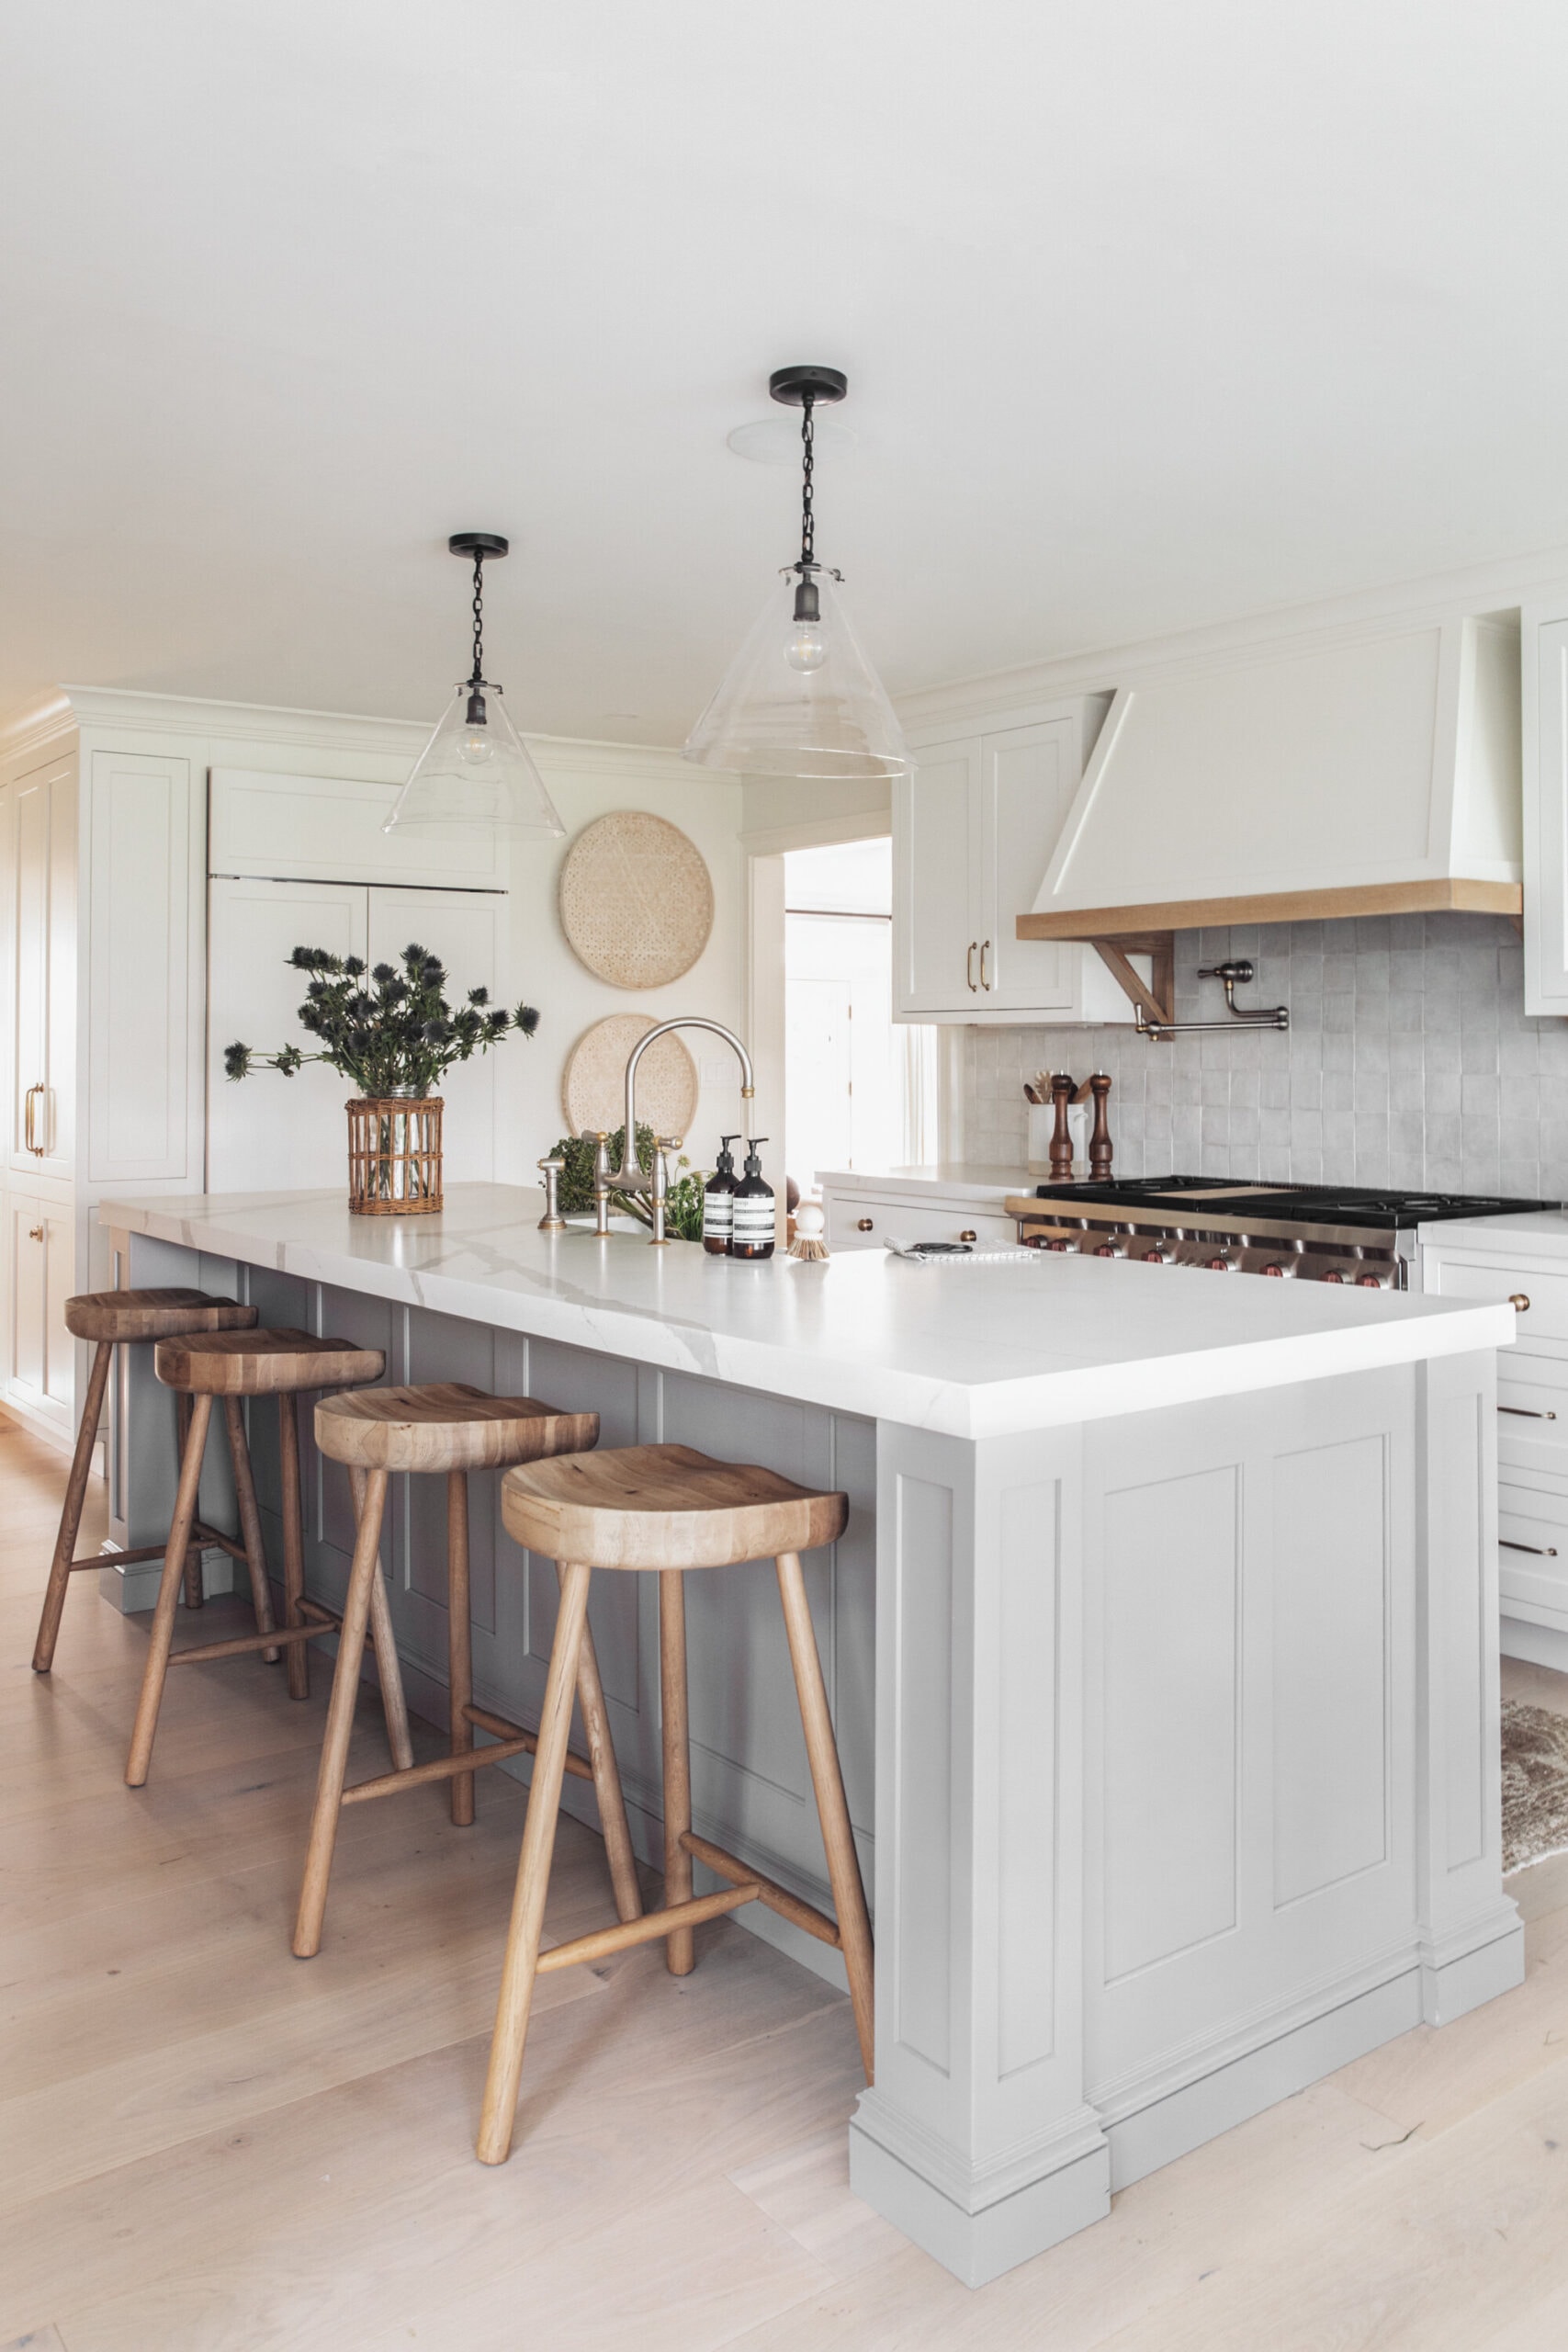 light grey kitchen island, white kitchen cabinets, wood industrial barstools, glass pendant lights over island